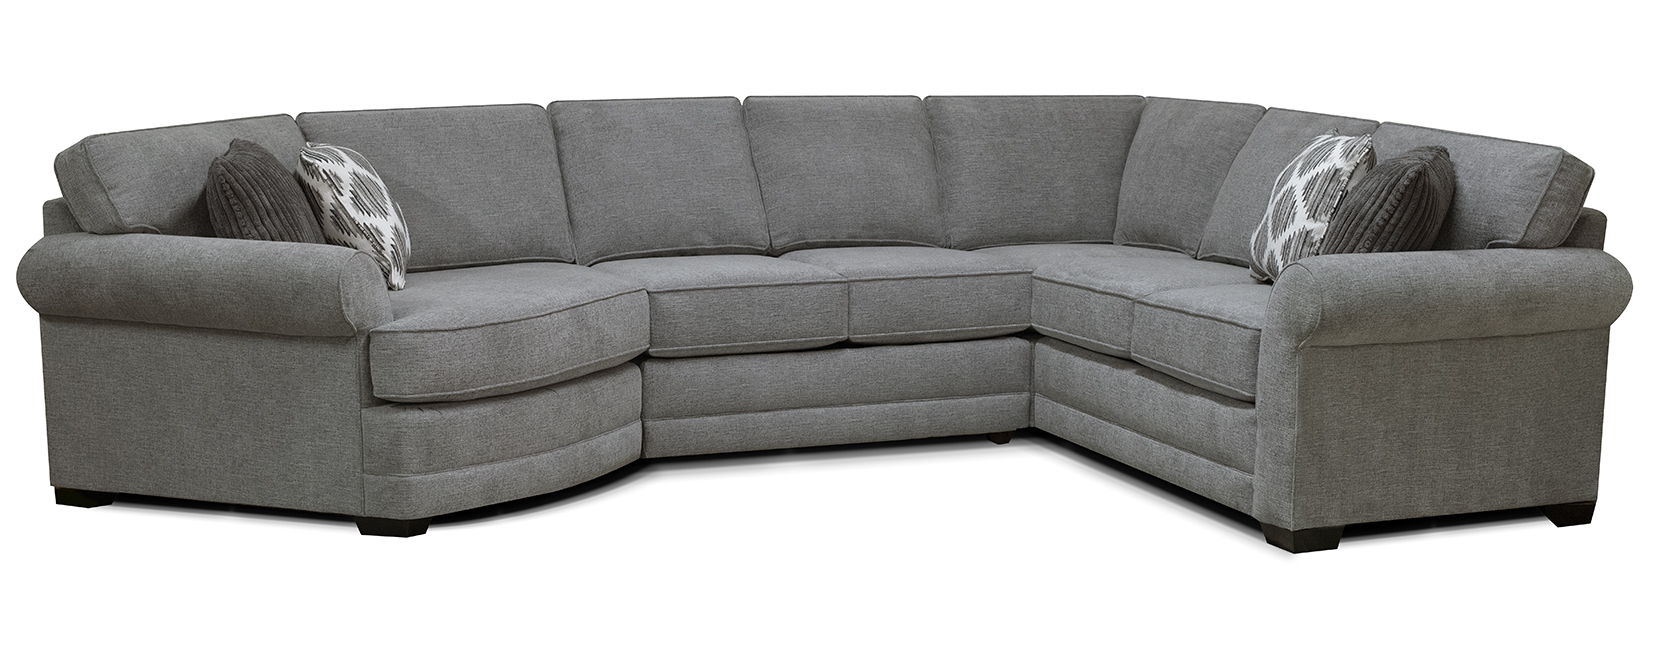 Brantley - 5630 - 4 PC Sectional (Right Arm Facing Loveseat)